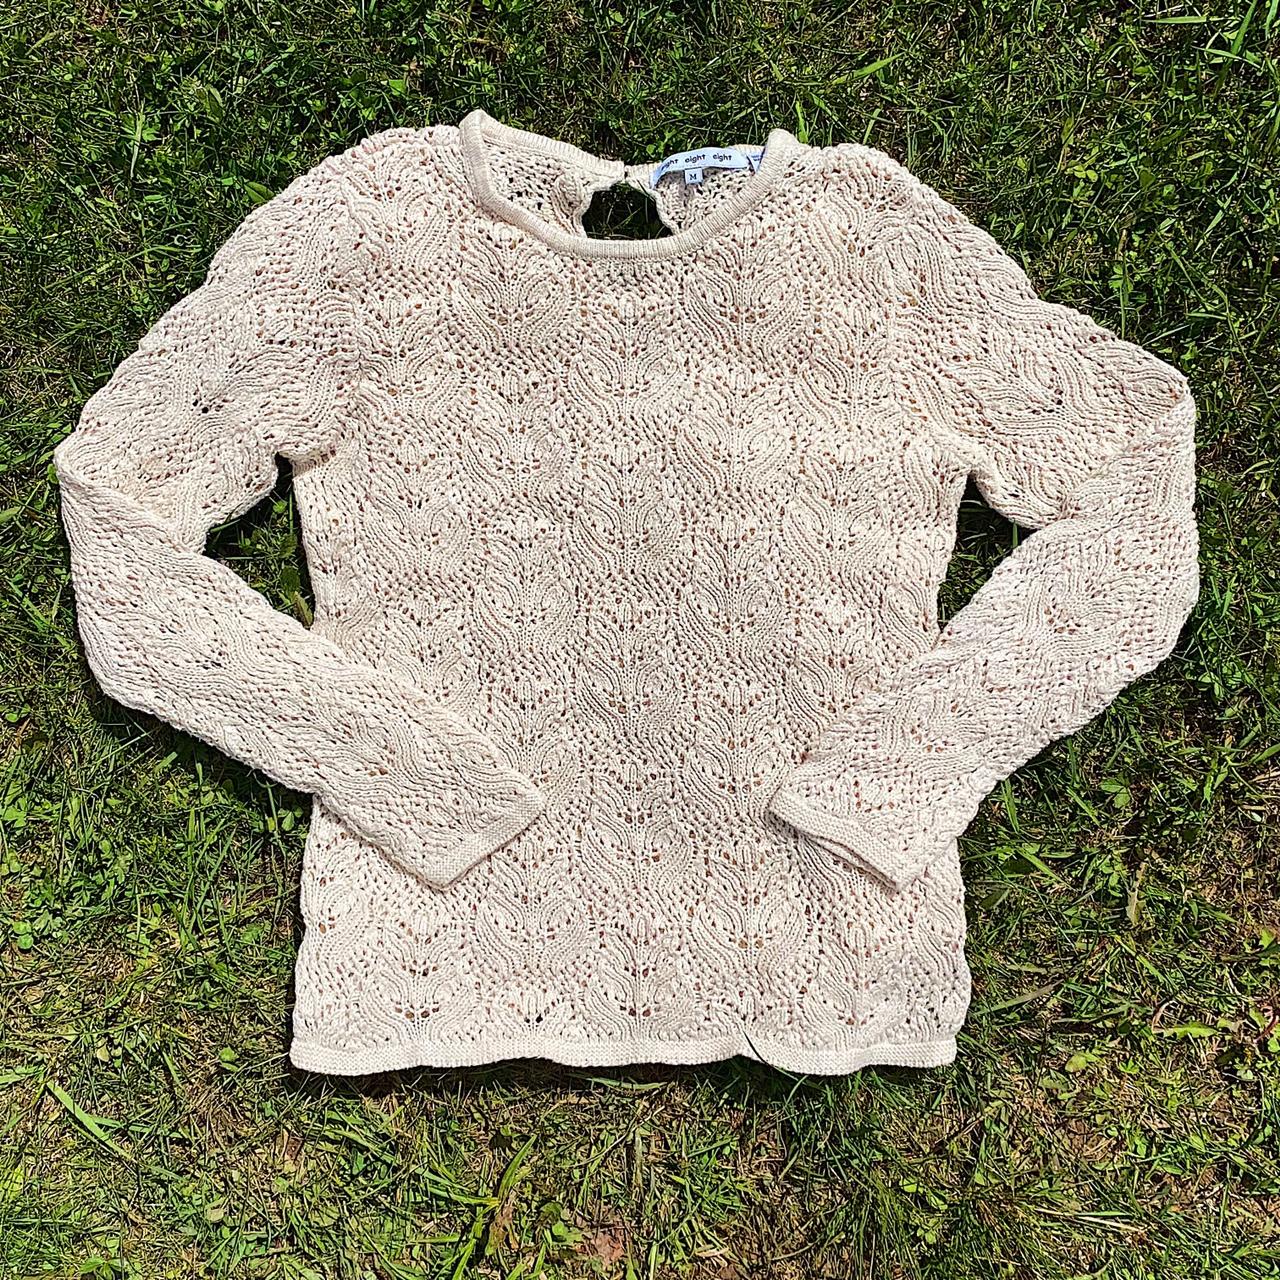 Product Image 2 - delicate 90s knit fairy top

☆